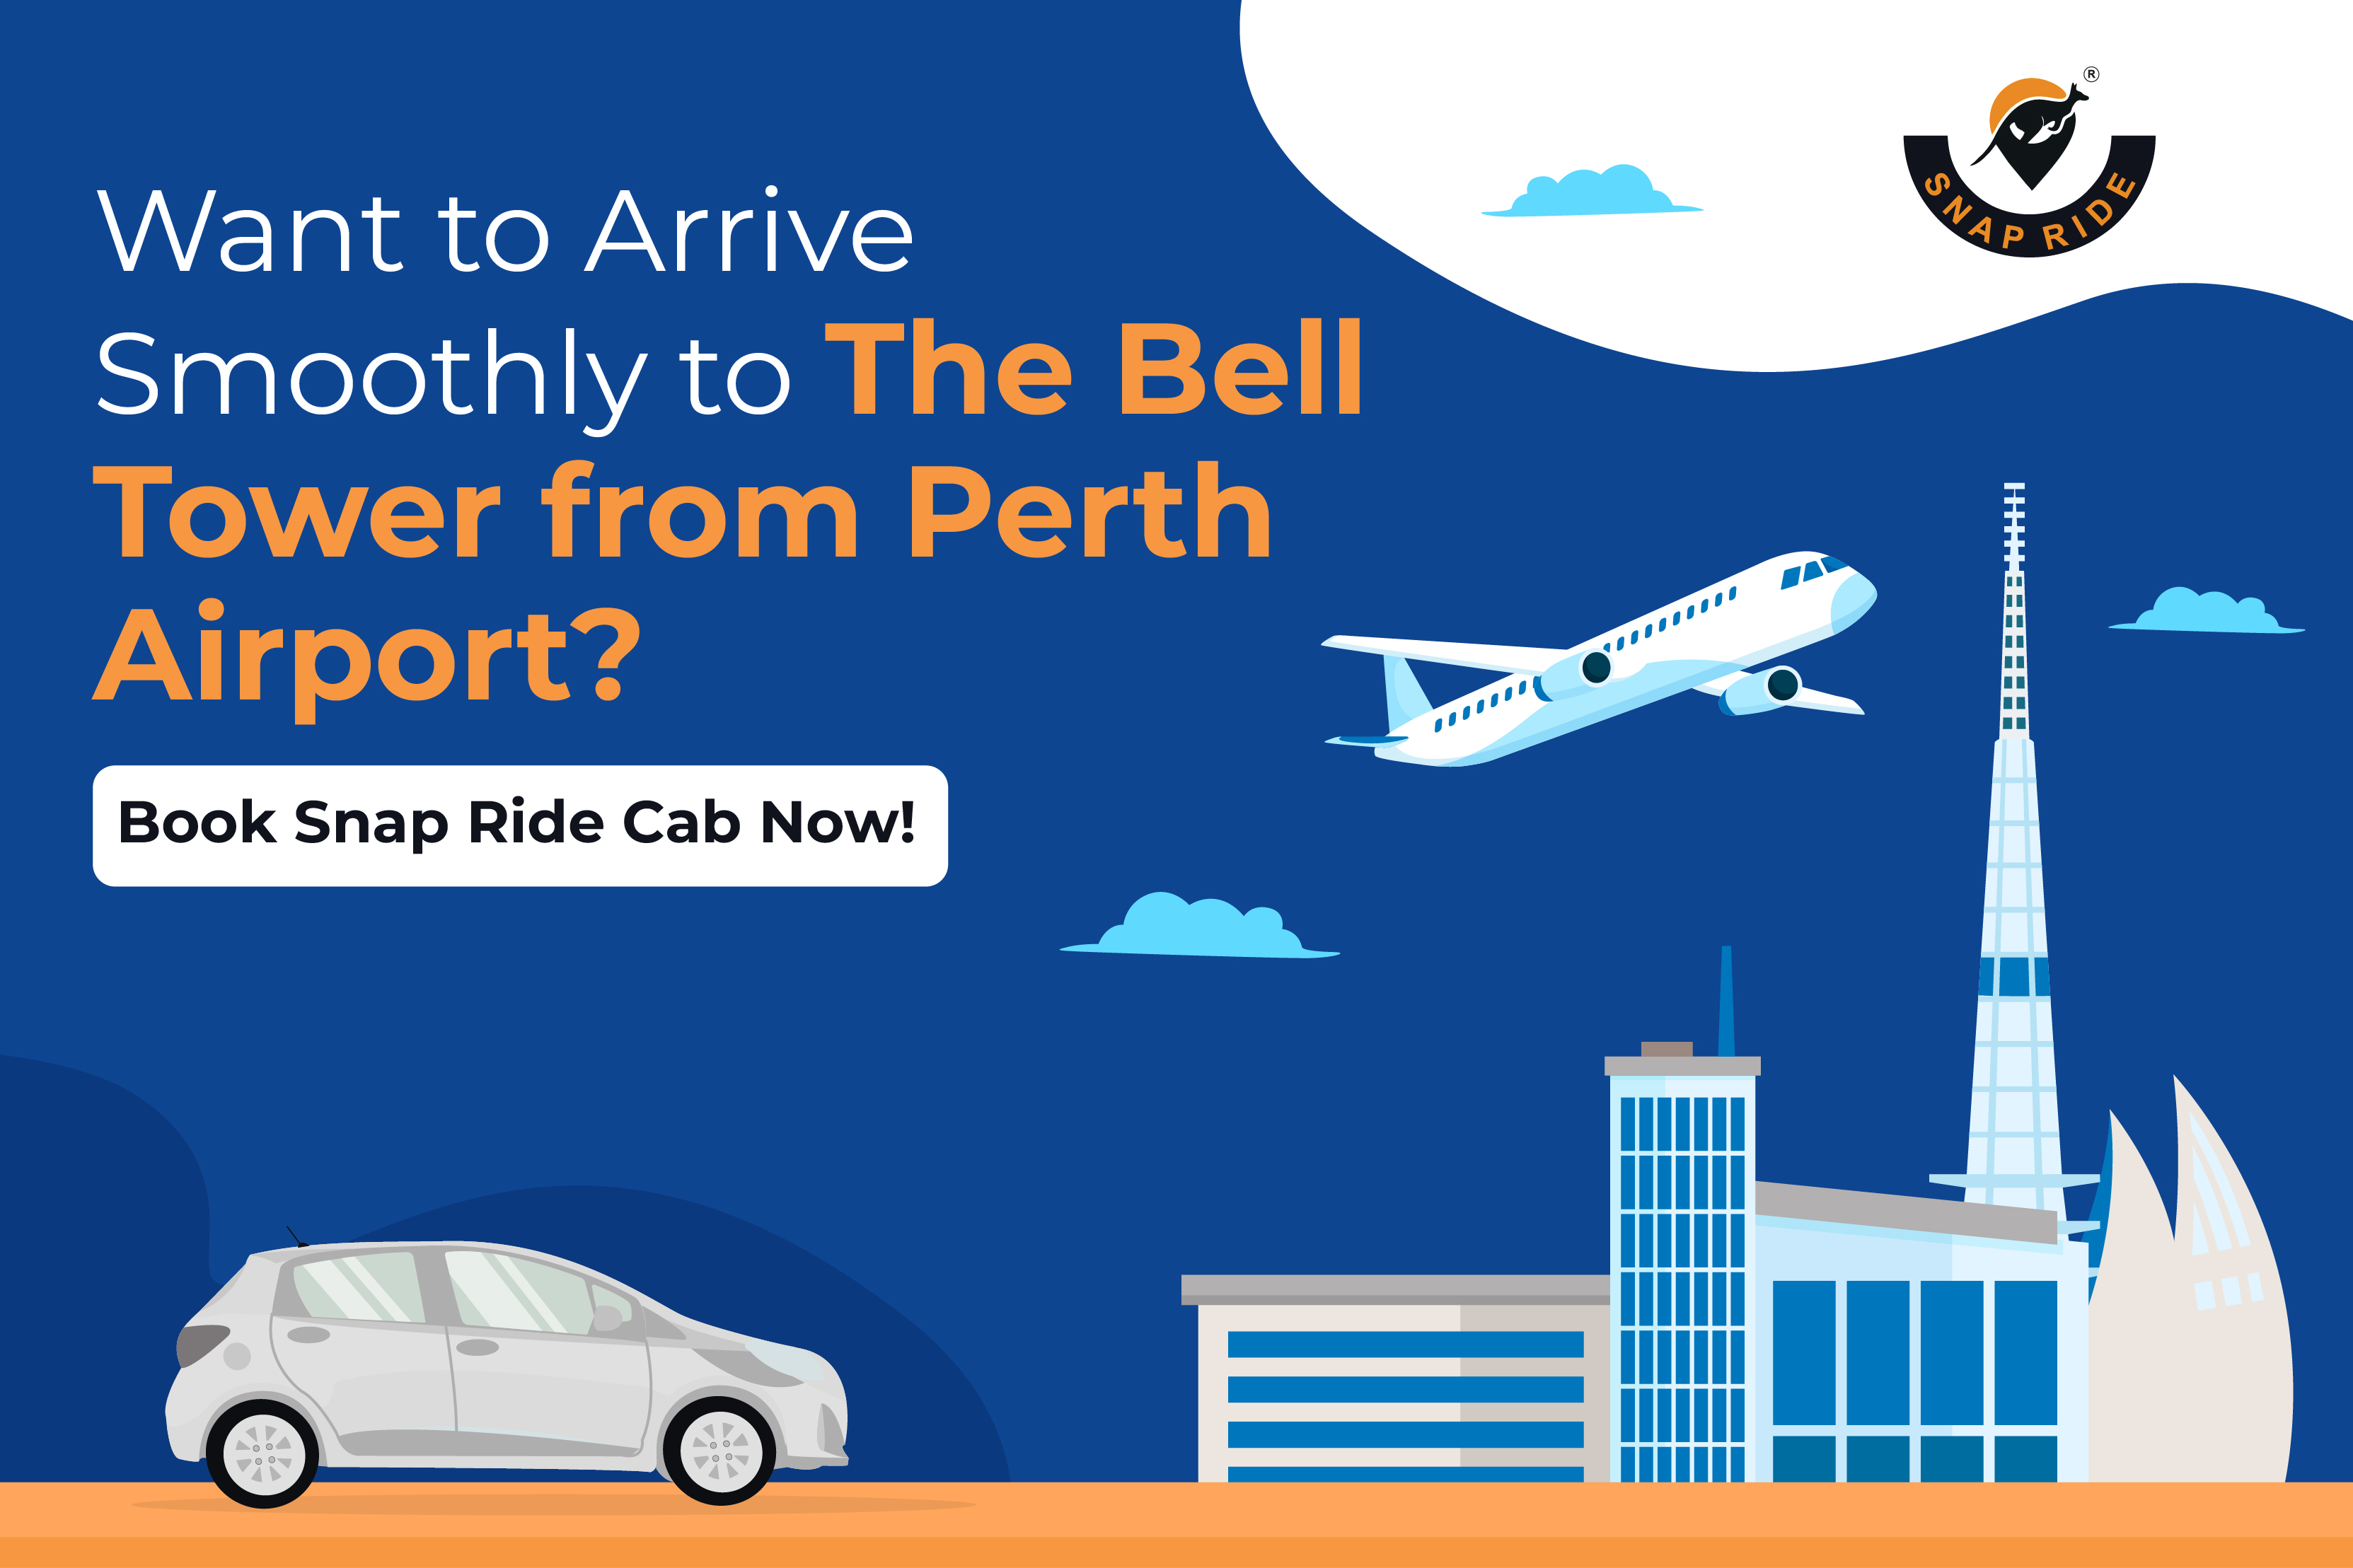 1706526782.Want to Arrive Smoothly to The Bell Tower from Perth Airport Book Snap Ride Cab Now!.jpg